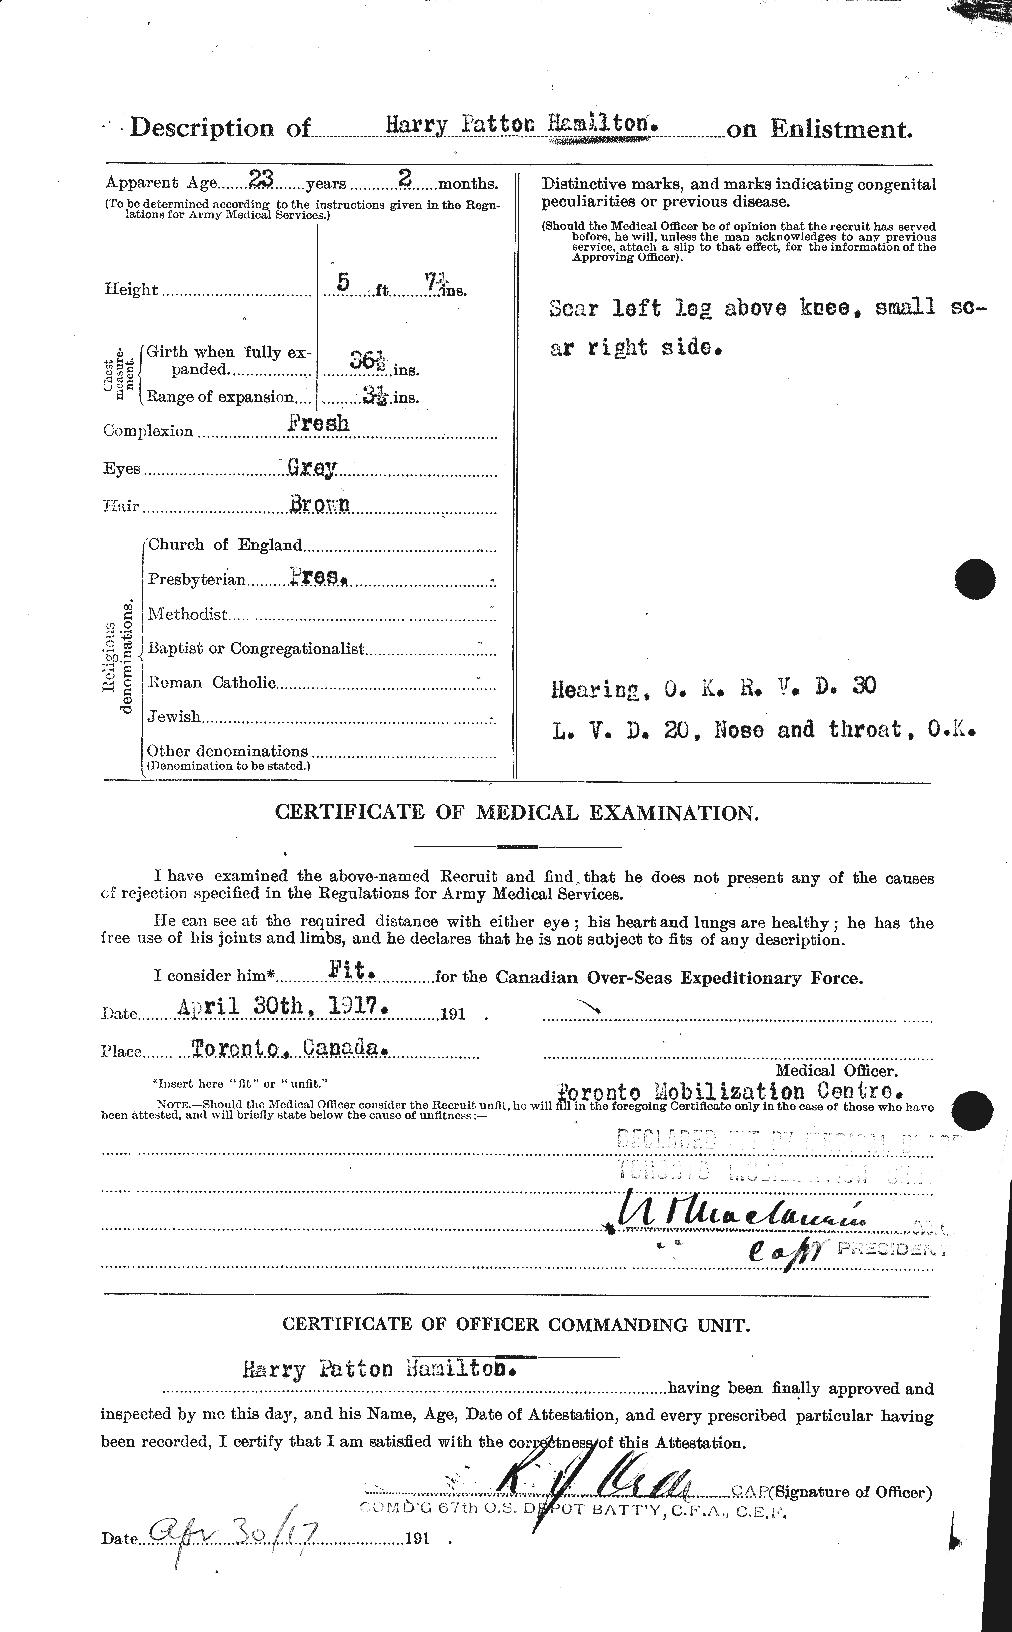 Personnel Records of the First World War - CEF 372514b